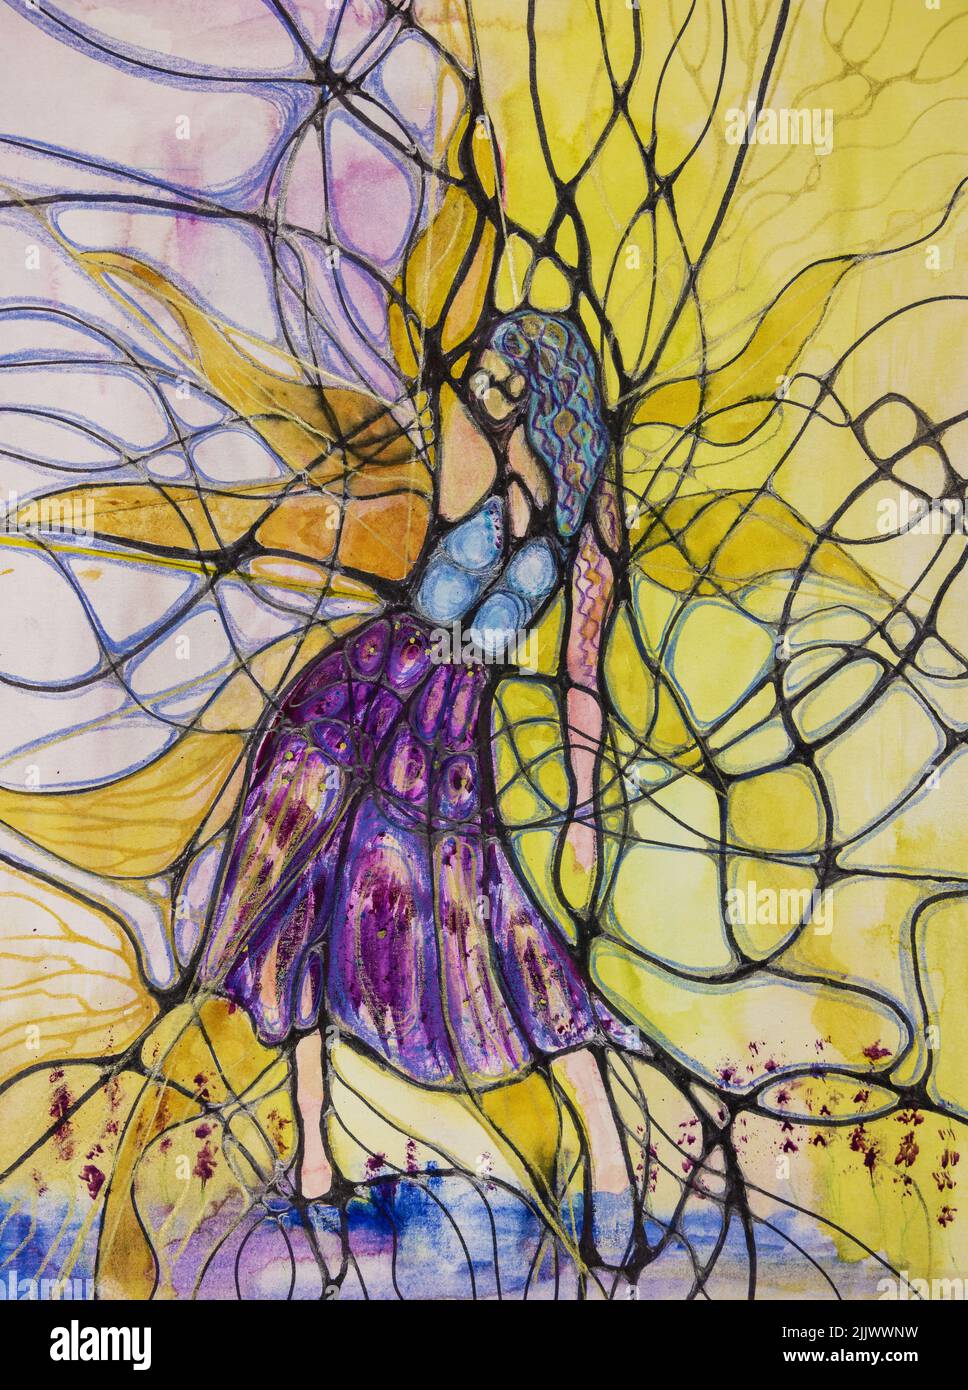 Wired dancing girl. The dabbing technique near the edges gives a soft focus effect due to the altered surface roughness of the paper. Stock Photo